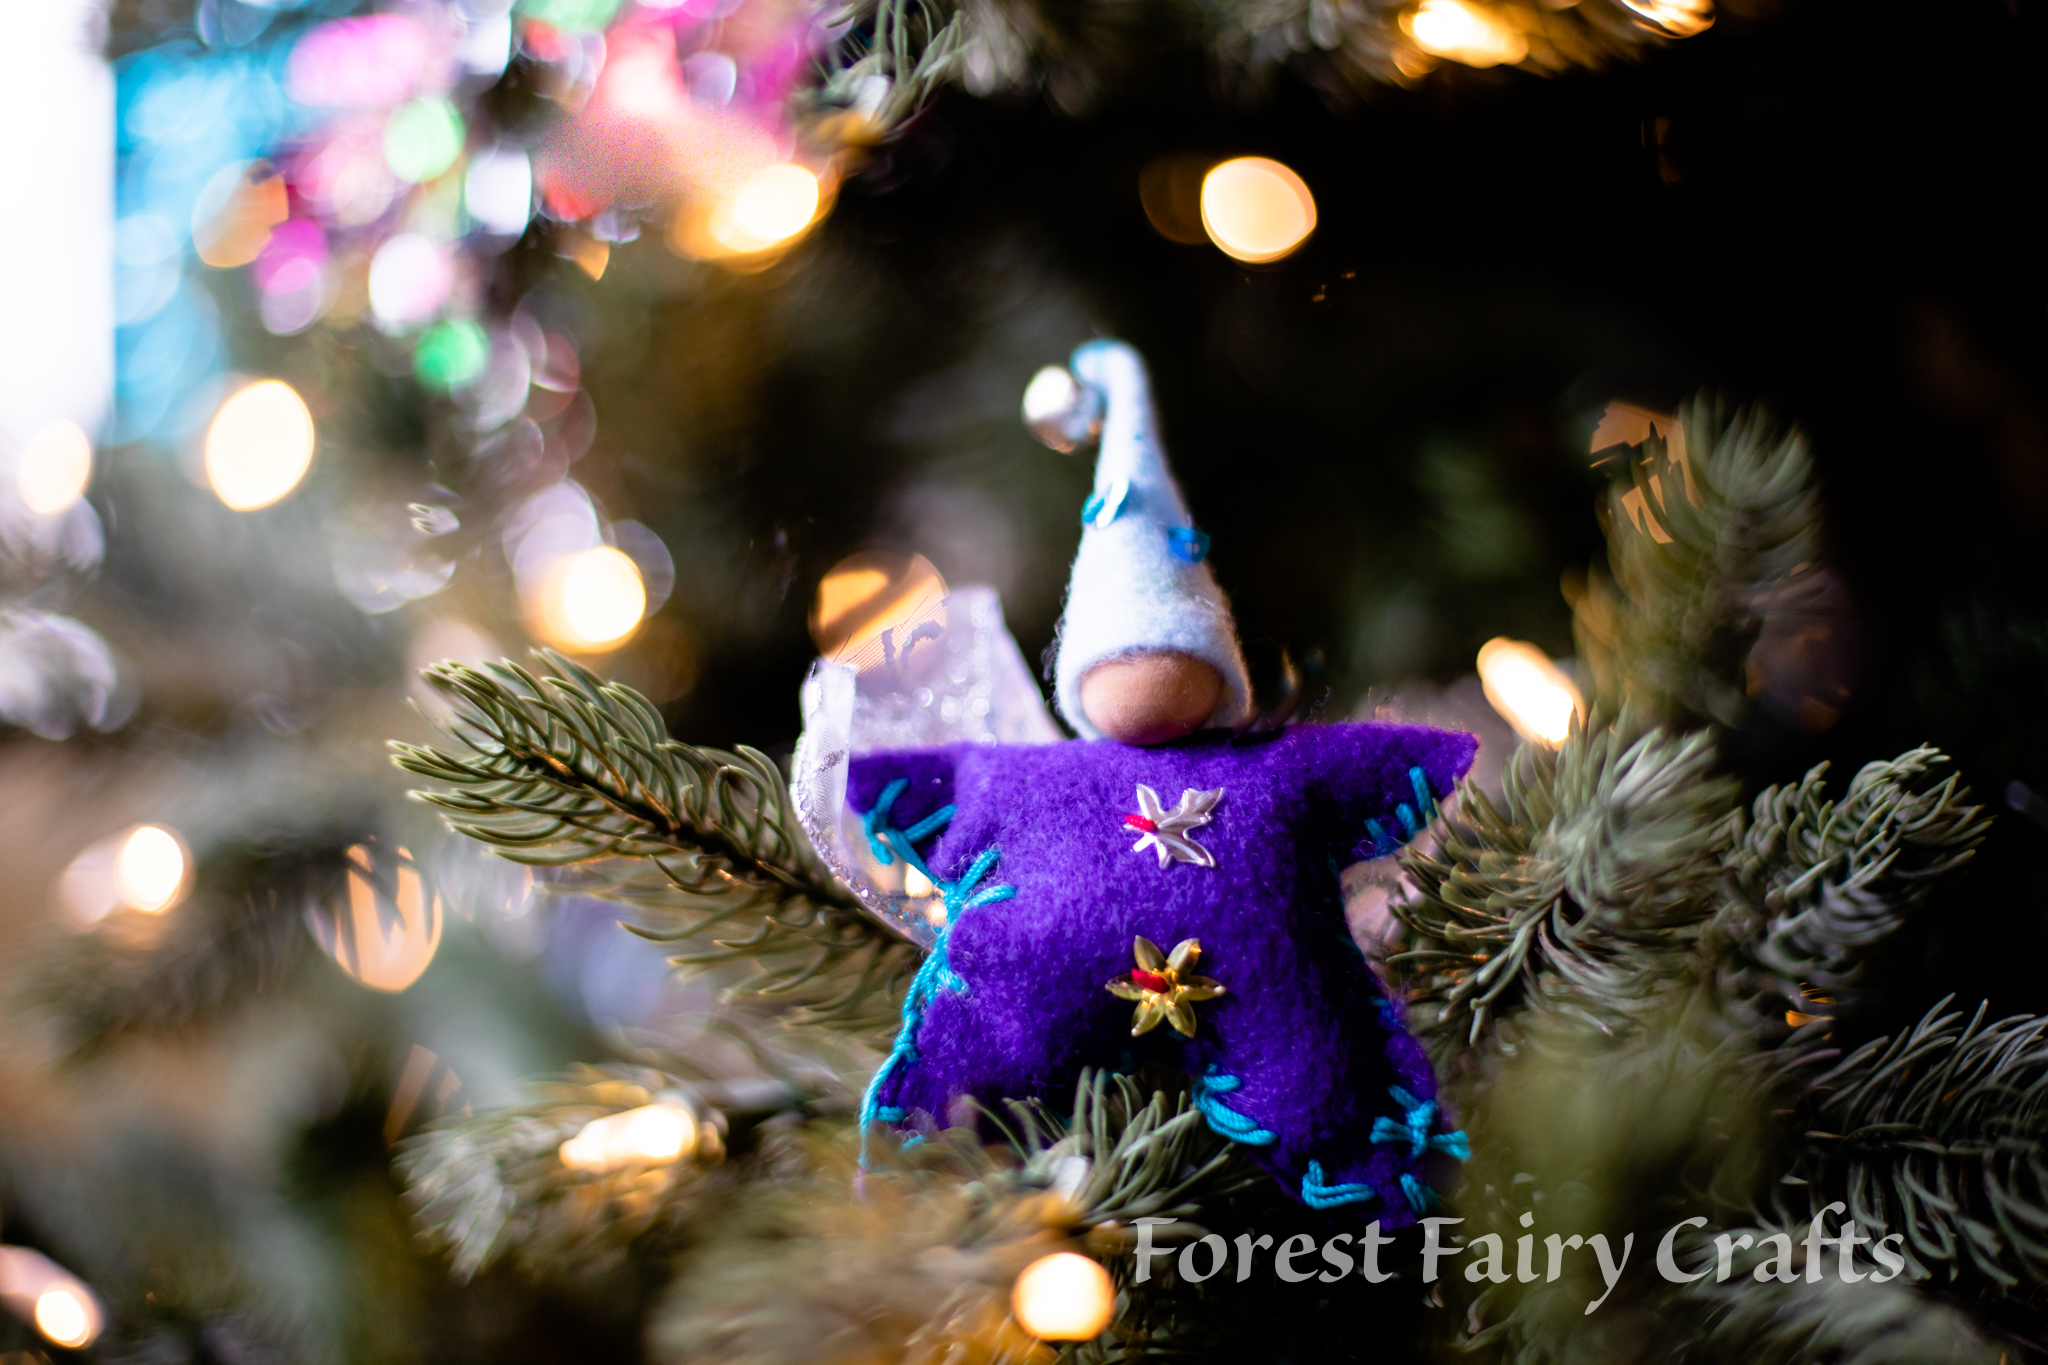 Star Babies made by Children using Forest Fairy Crafts Book by Lenka Vodicka-Paredes and Asia Currie | Christmas Ornaments and Decorations with Fairy Dolls and Felt Crafts